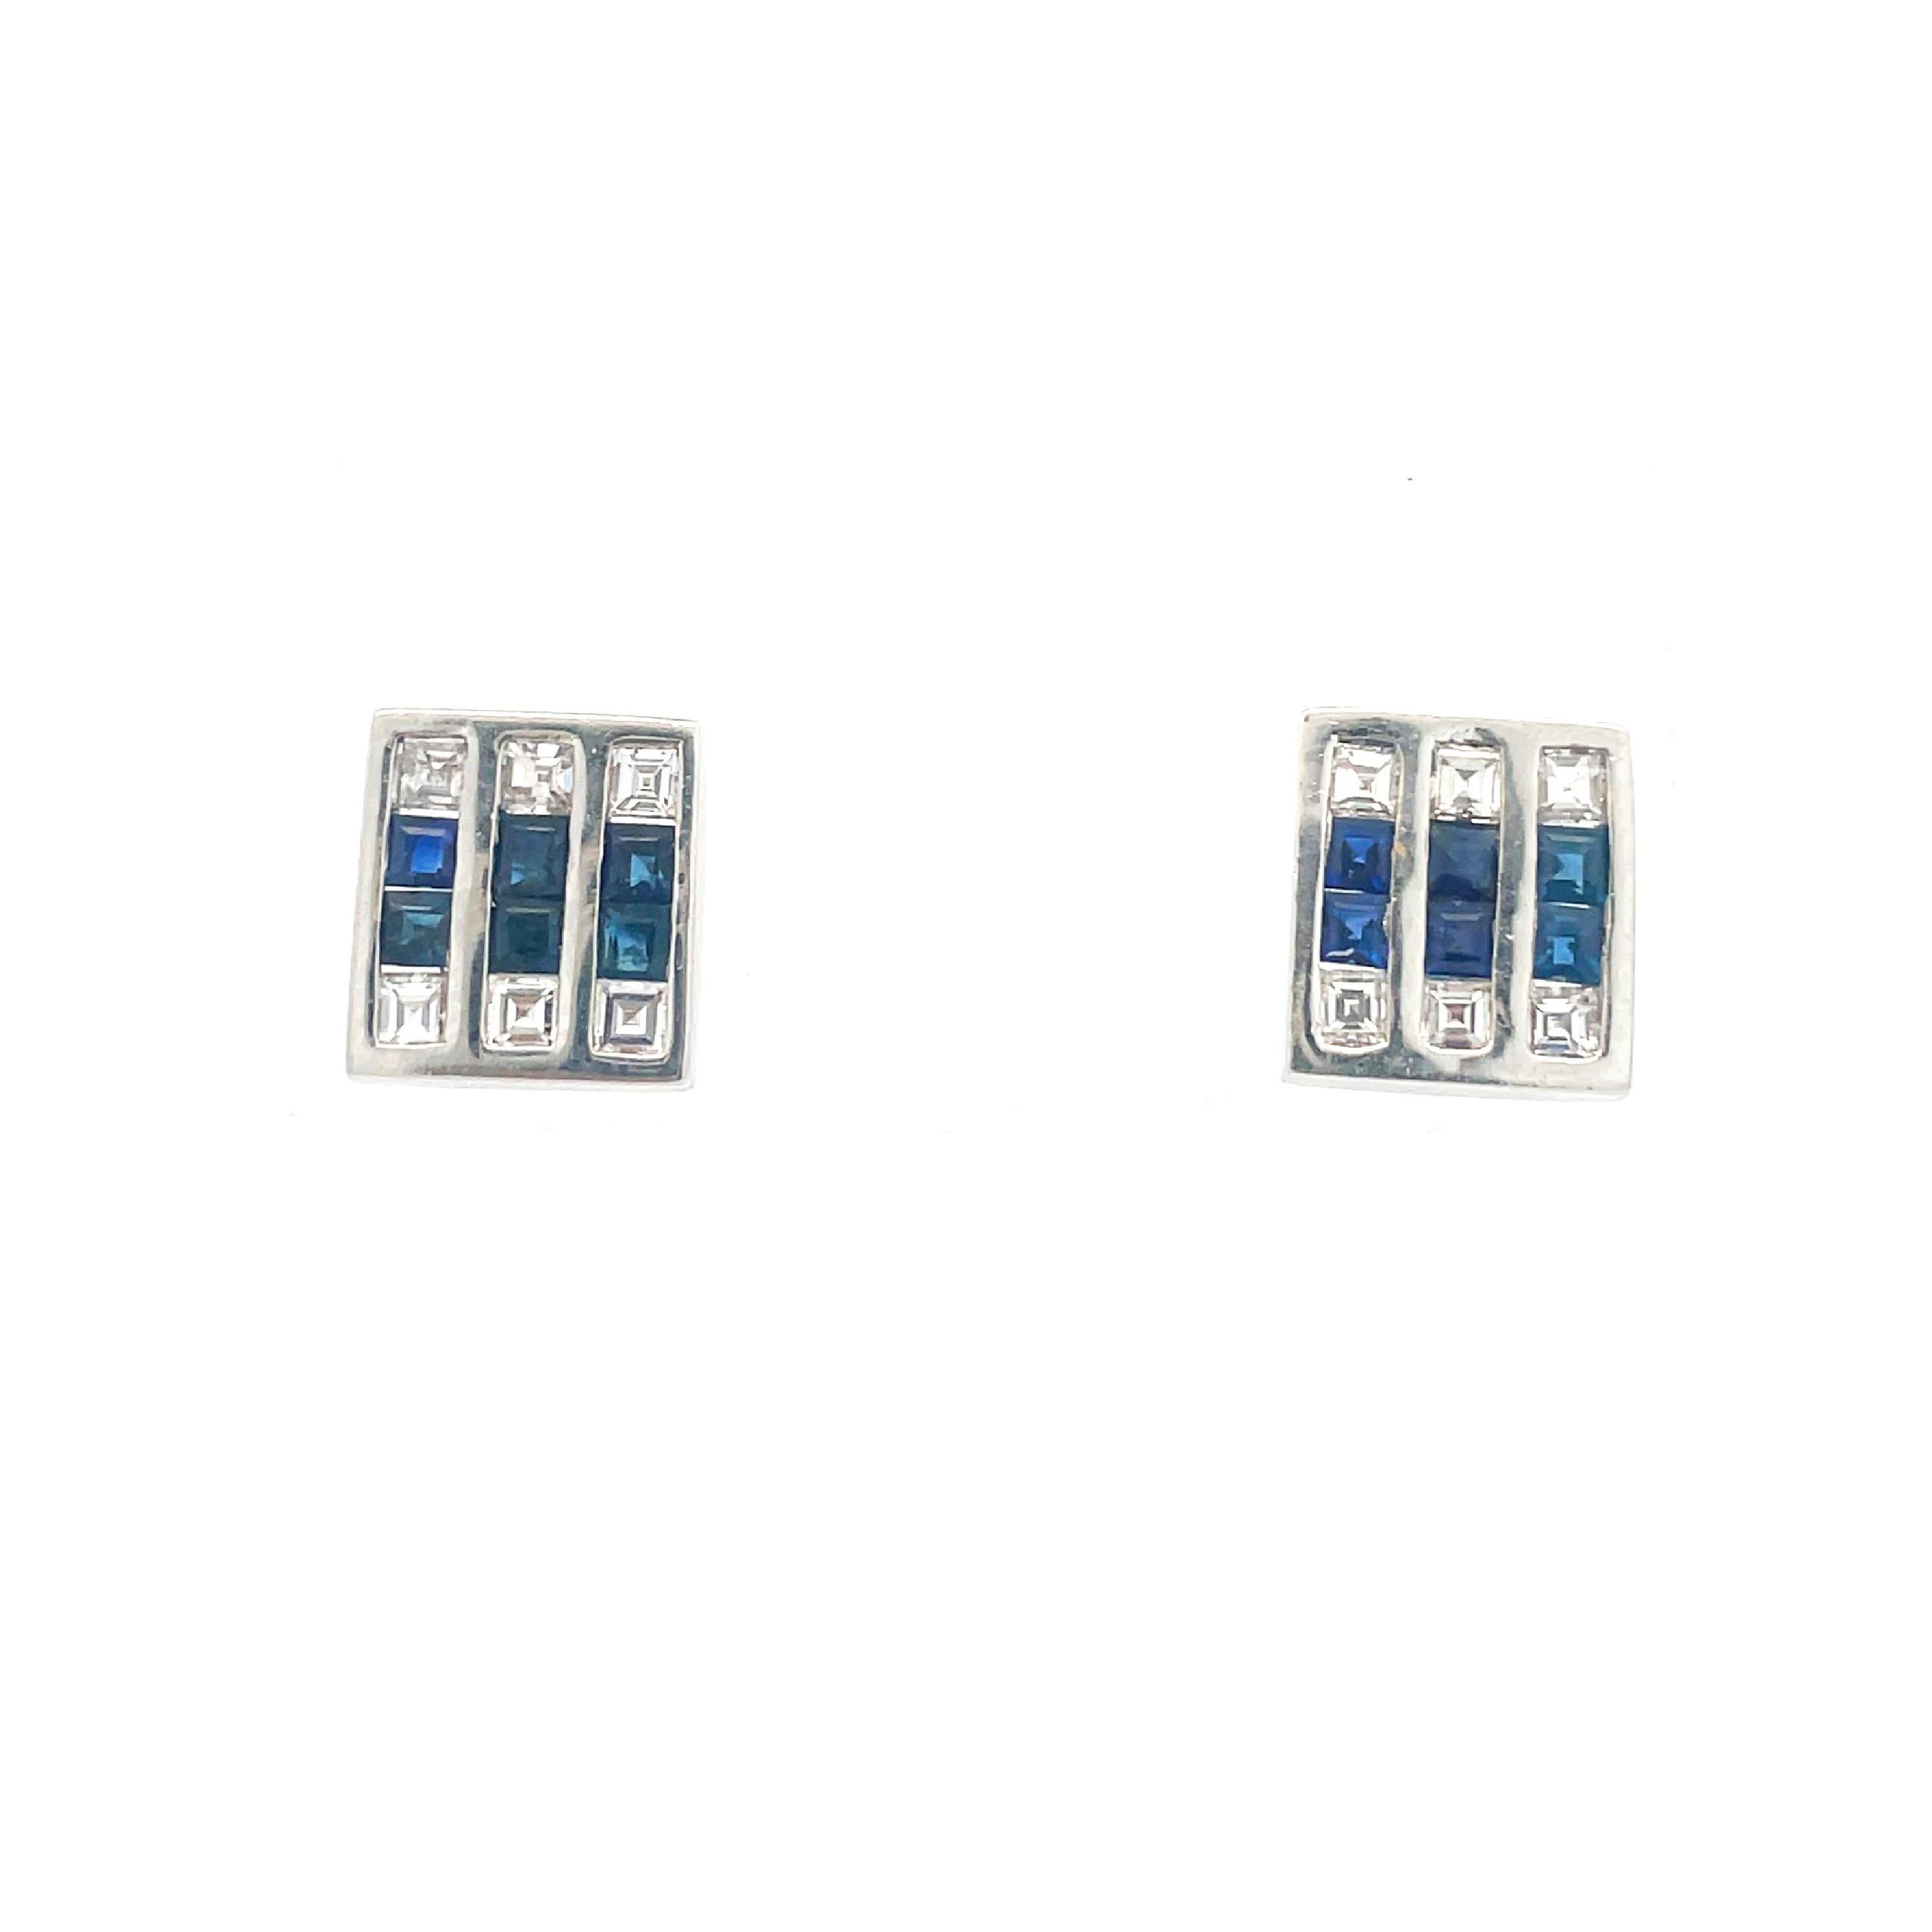 This is a stunning pair of Art Deco earrings crafted in forever white Platinum that showcases bright white square-cut diamonds and vivid blue sapphires. These exquisite ear studs, artfully and intricately hand fabricated in platinum, will not